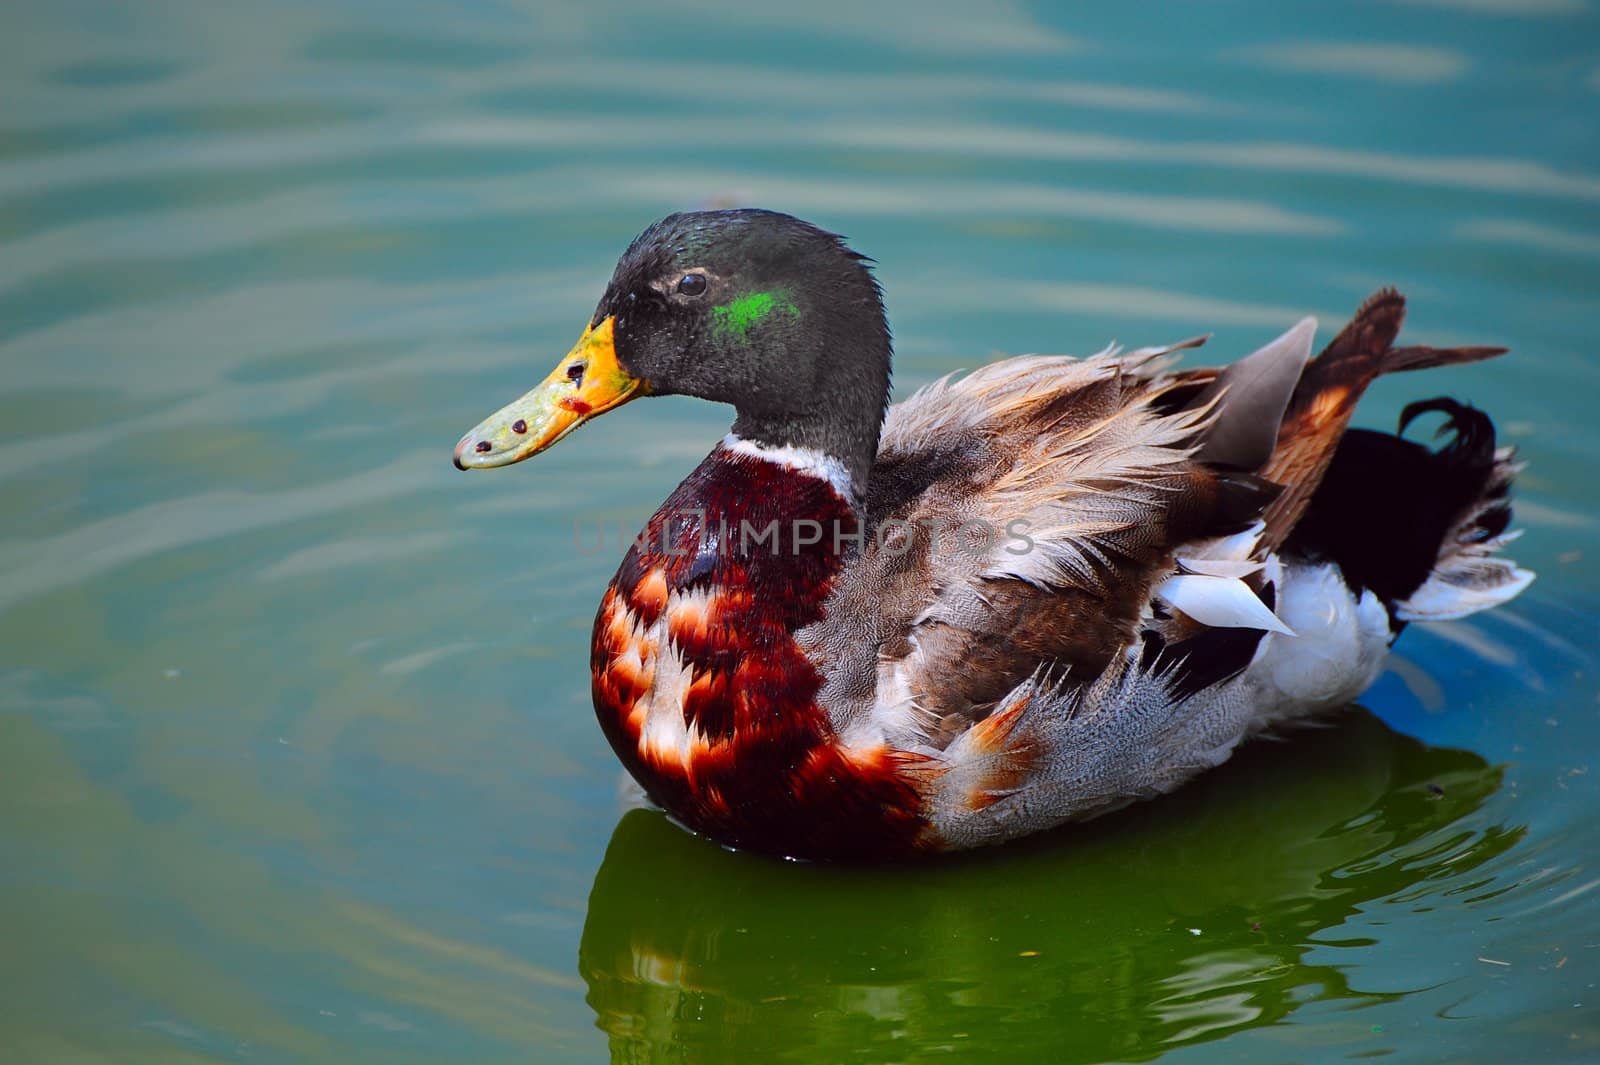 A Swimming Mallard Duck And His Reflection.